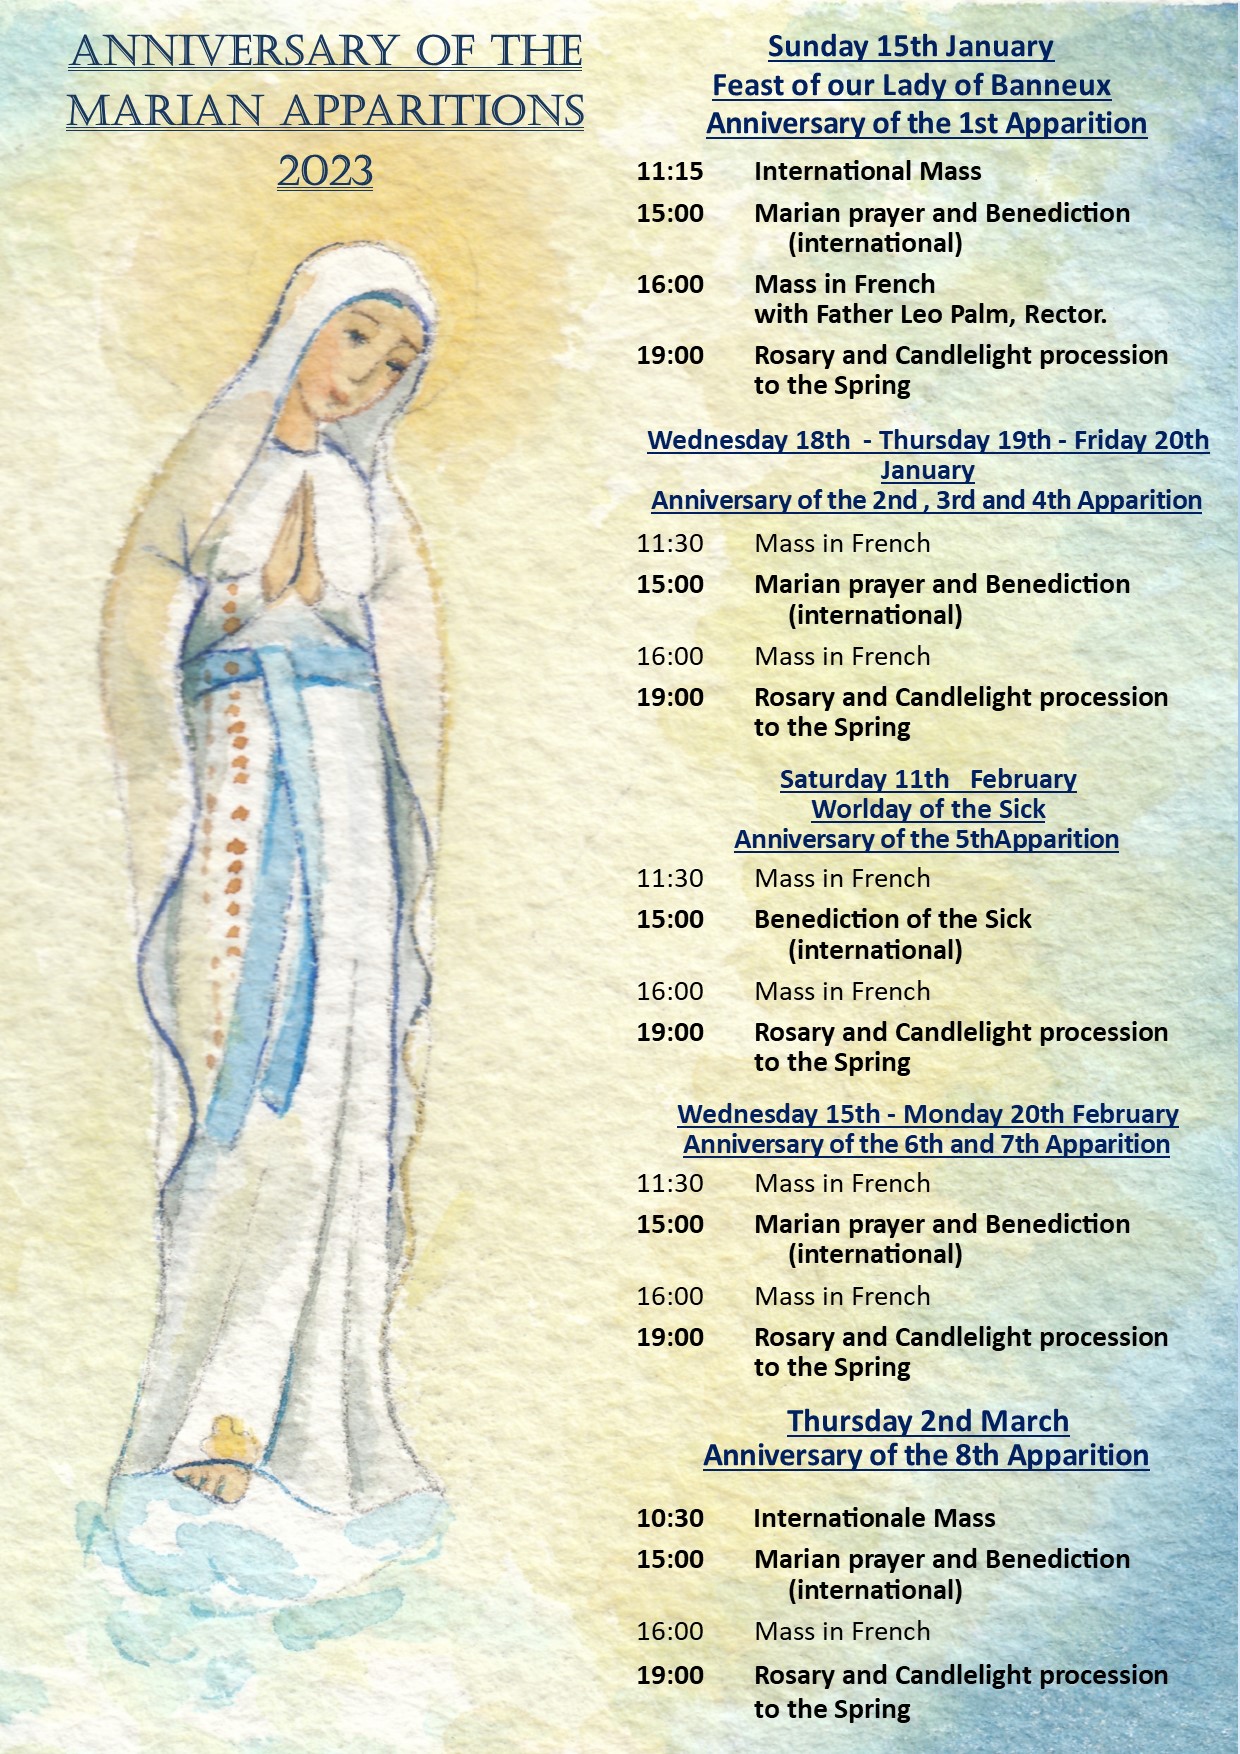 Anniversary of the Marian Apparitions 2023 Banneux NotreDame